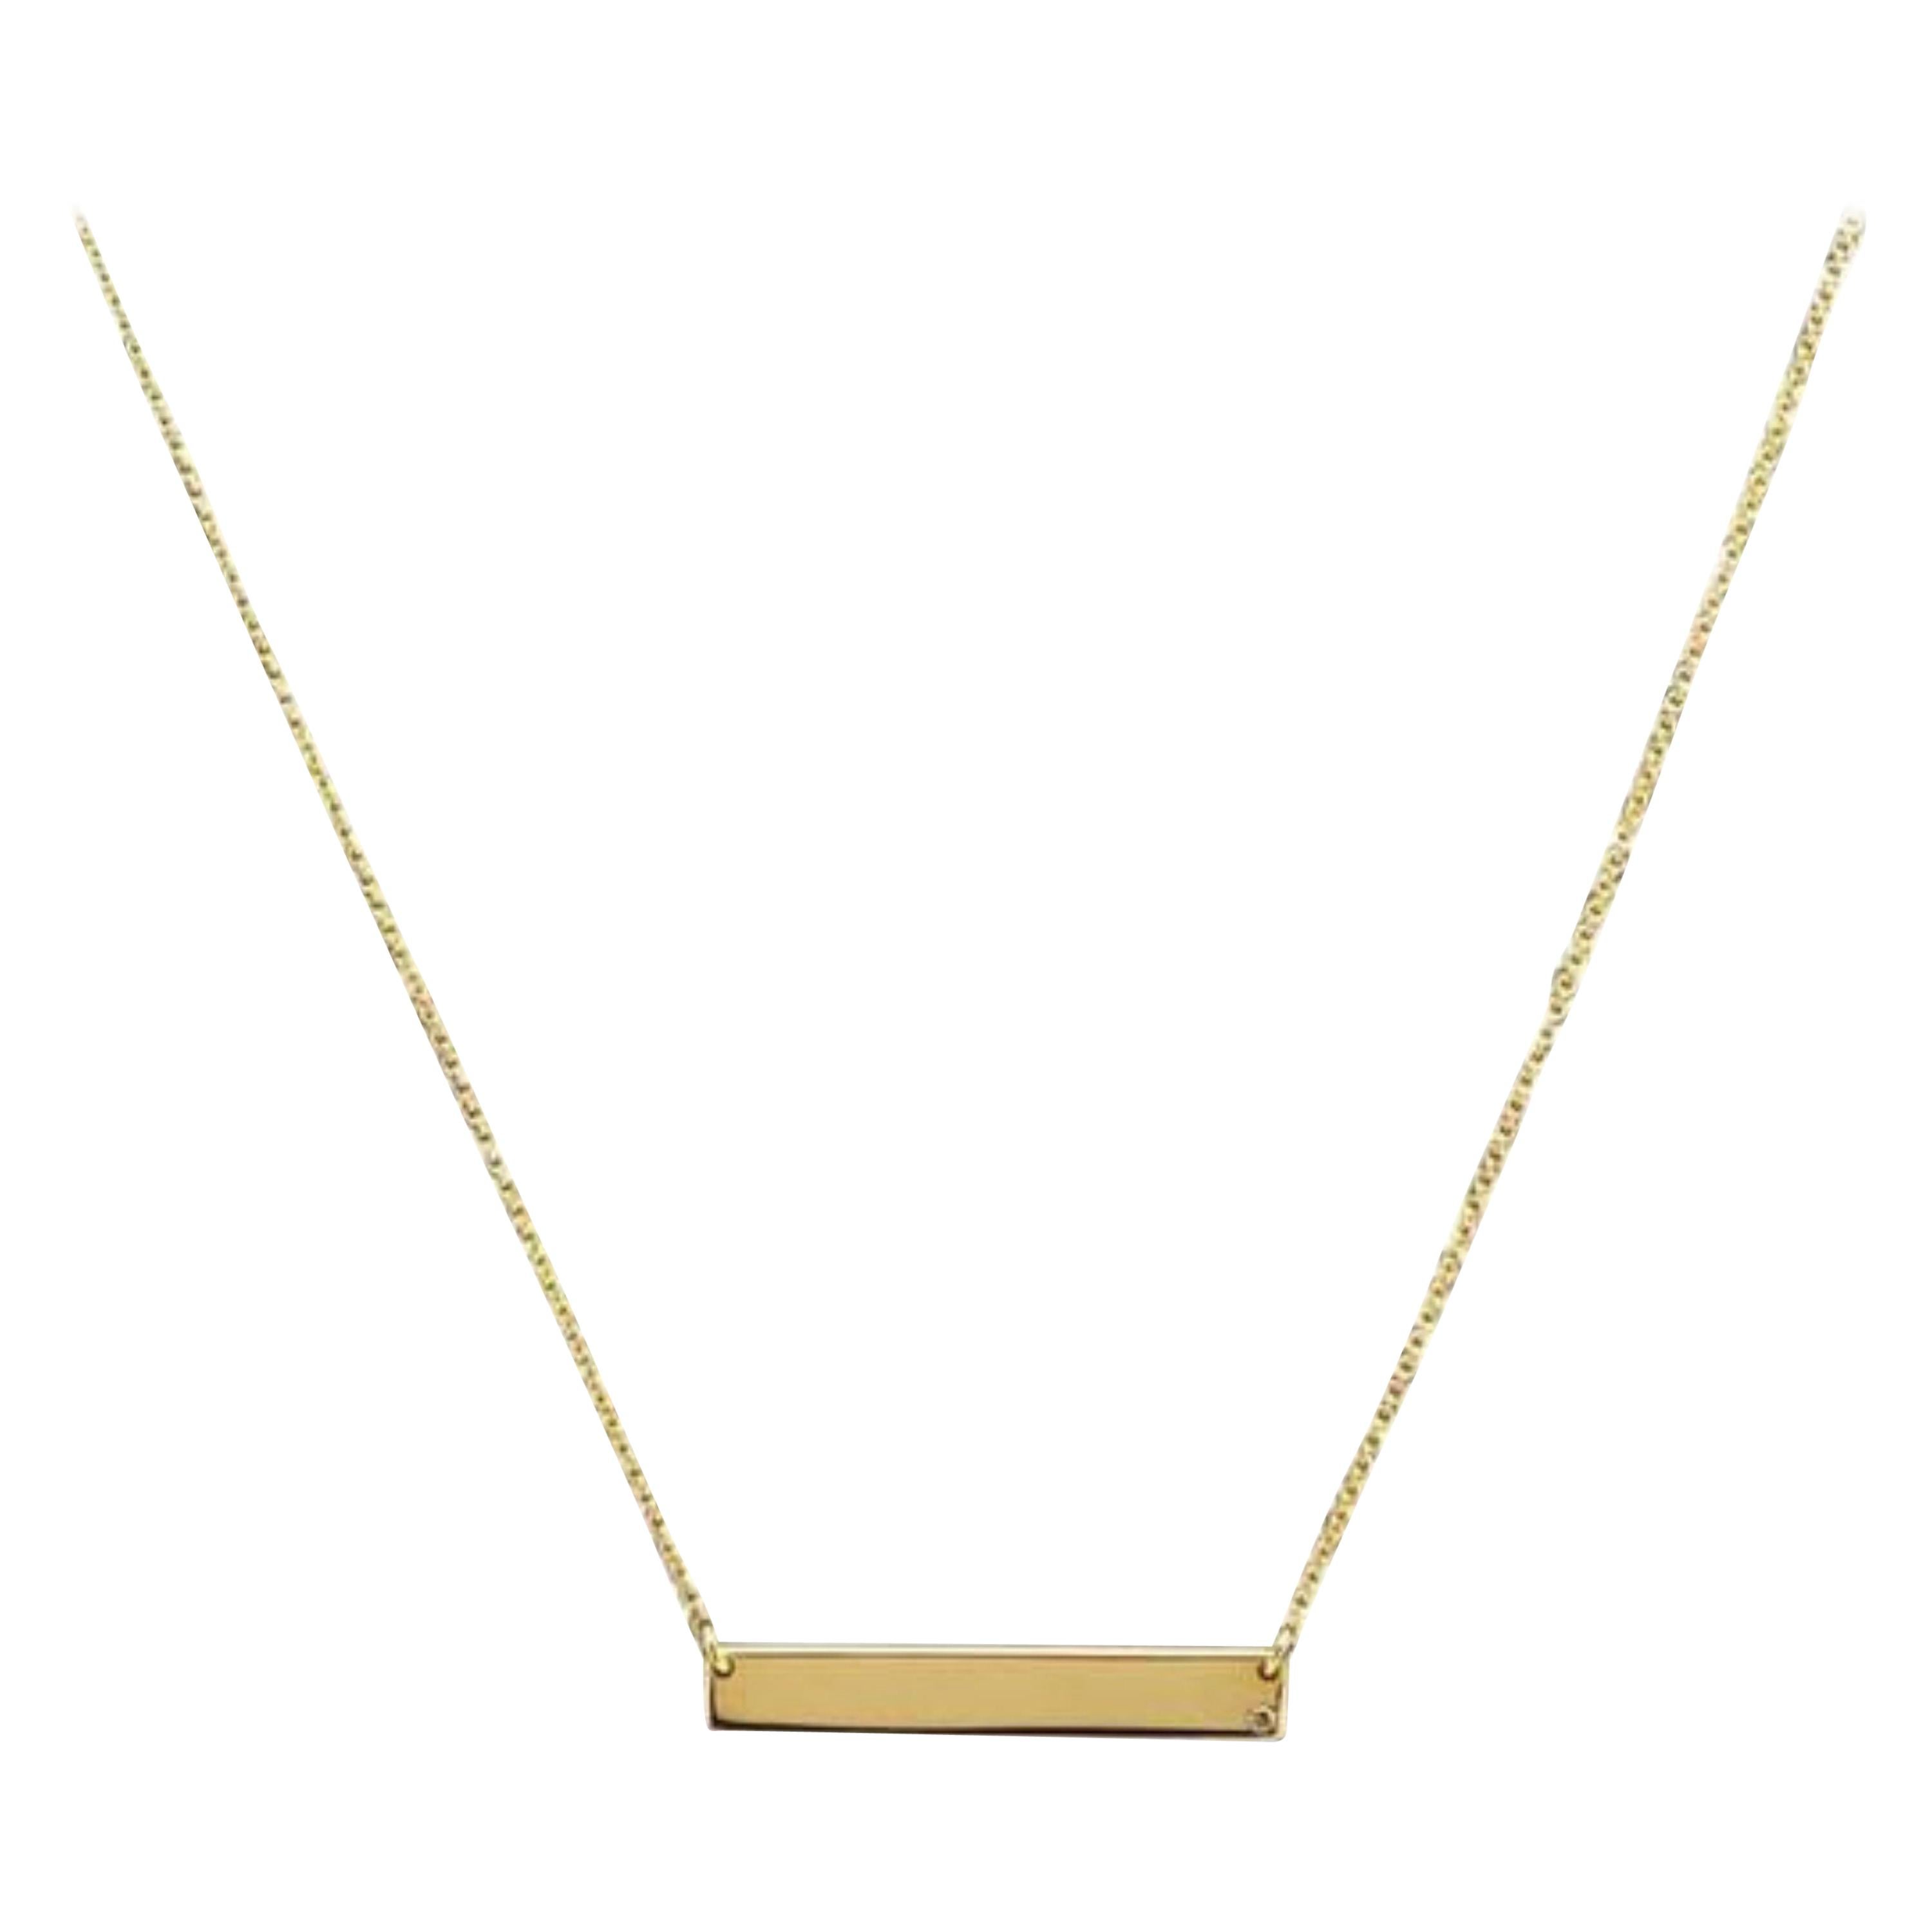 Splendid 14 Karat Solid Yellow Gold Bar Necklace with Diamond Accent